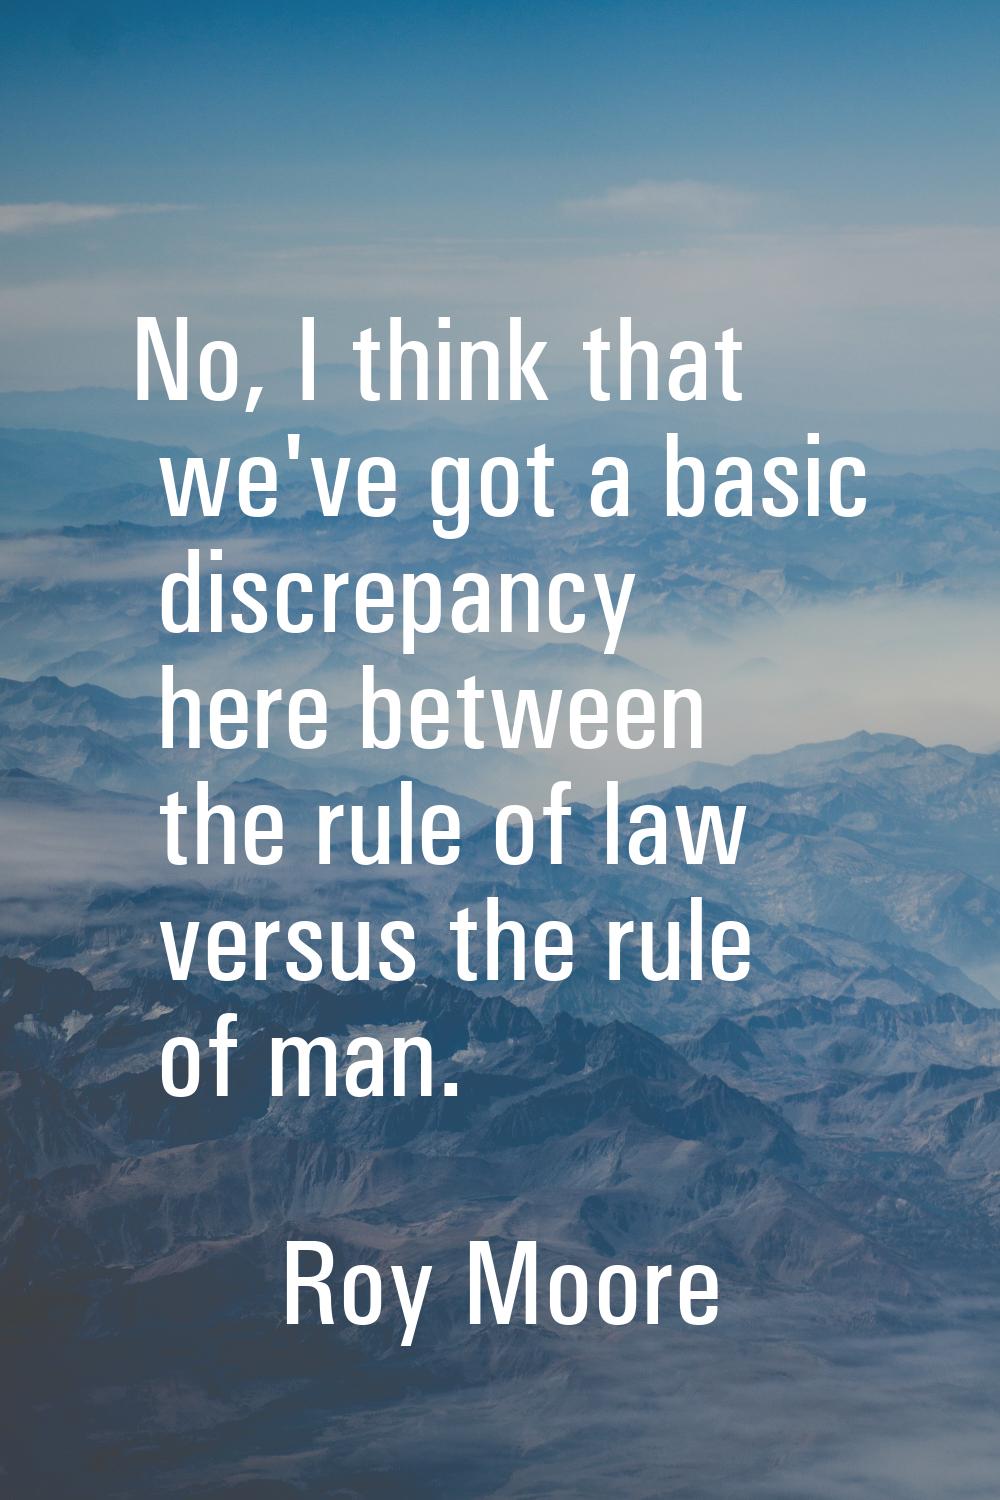 No, I think that we've got a basic discrepancy here between the rule of law versus the rule of man.